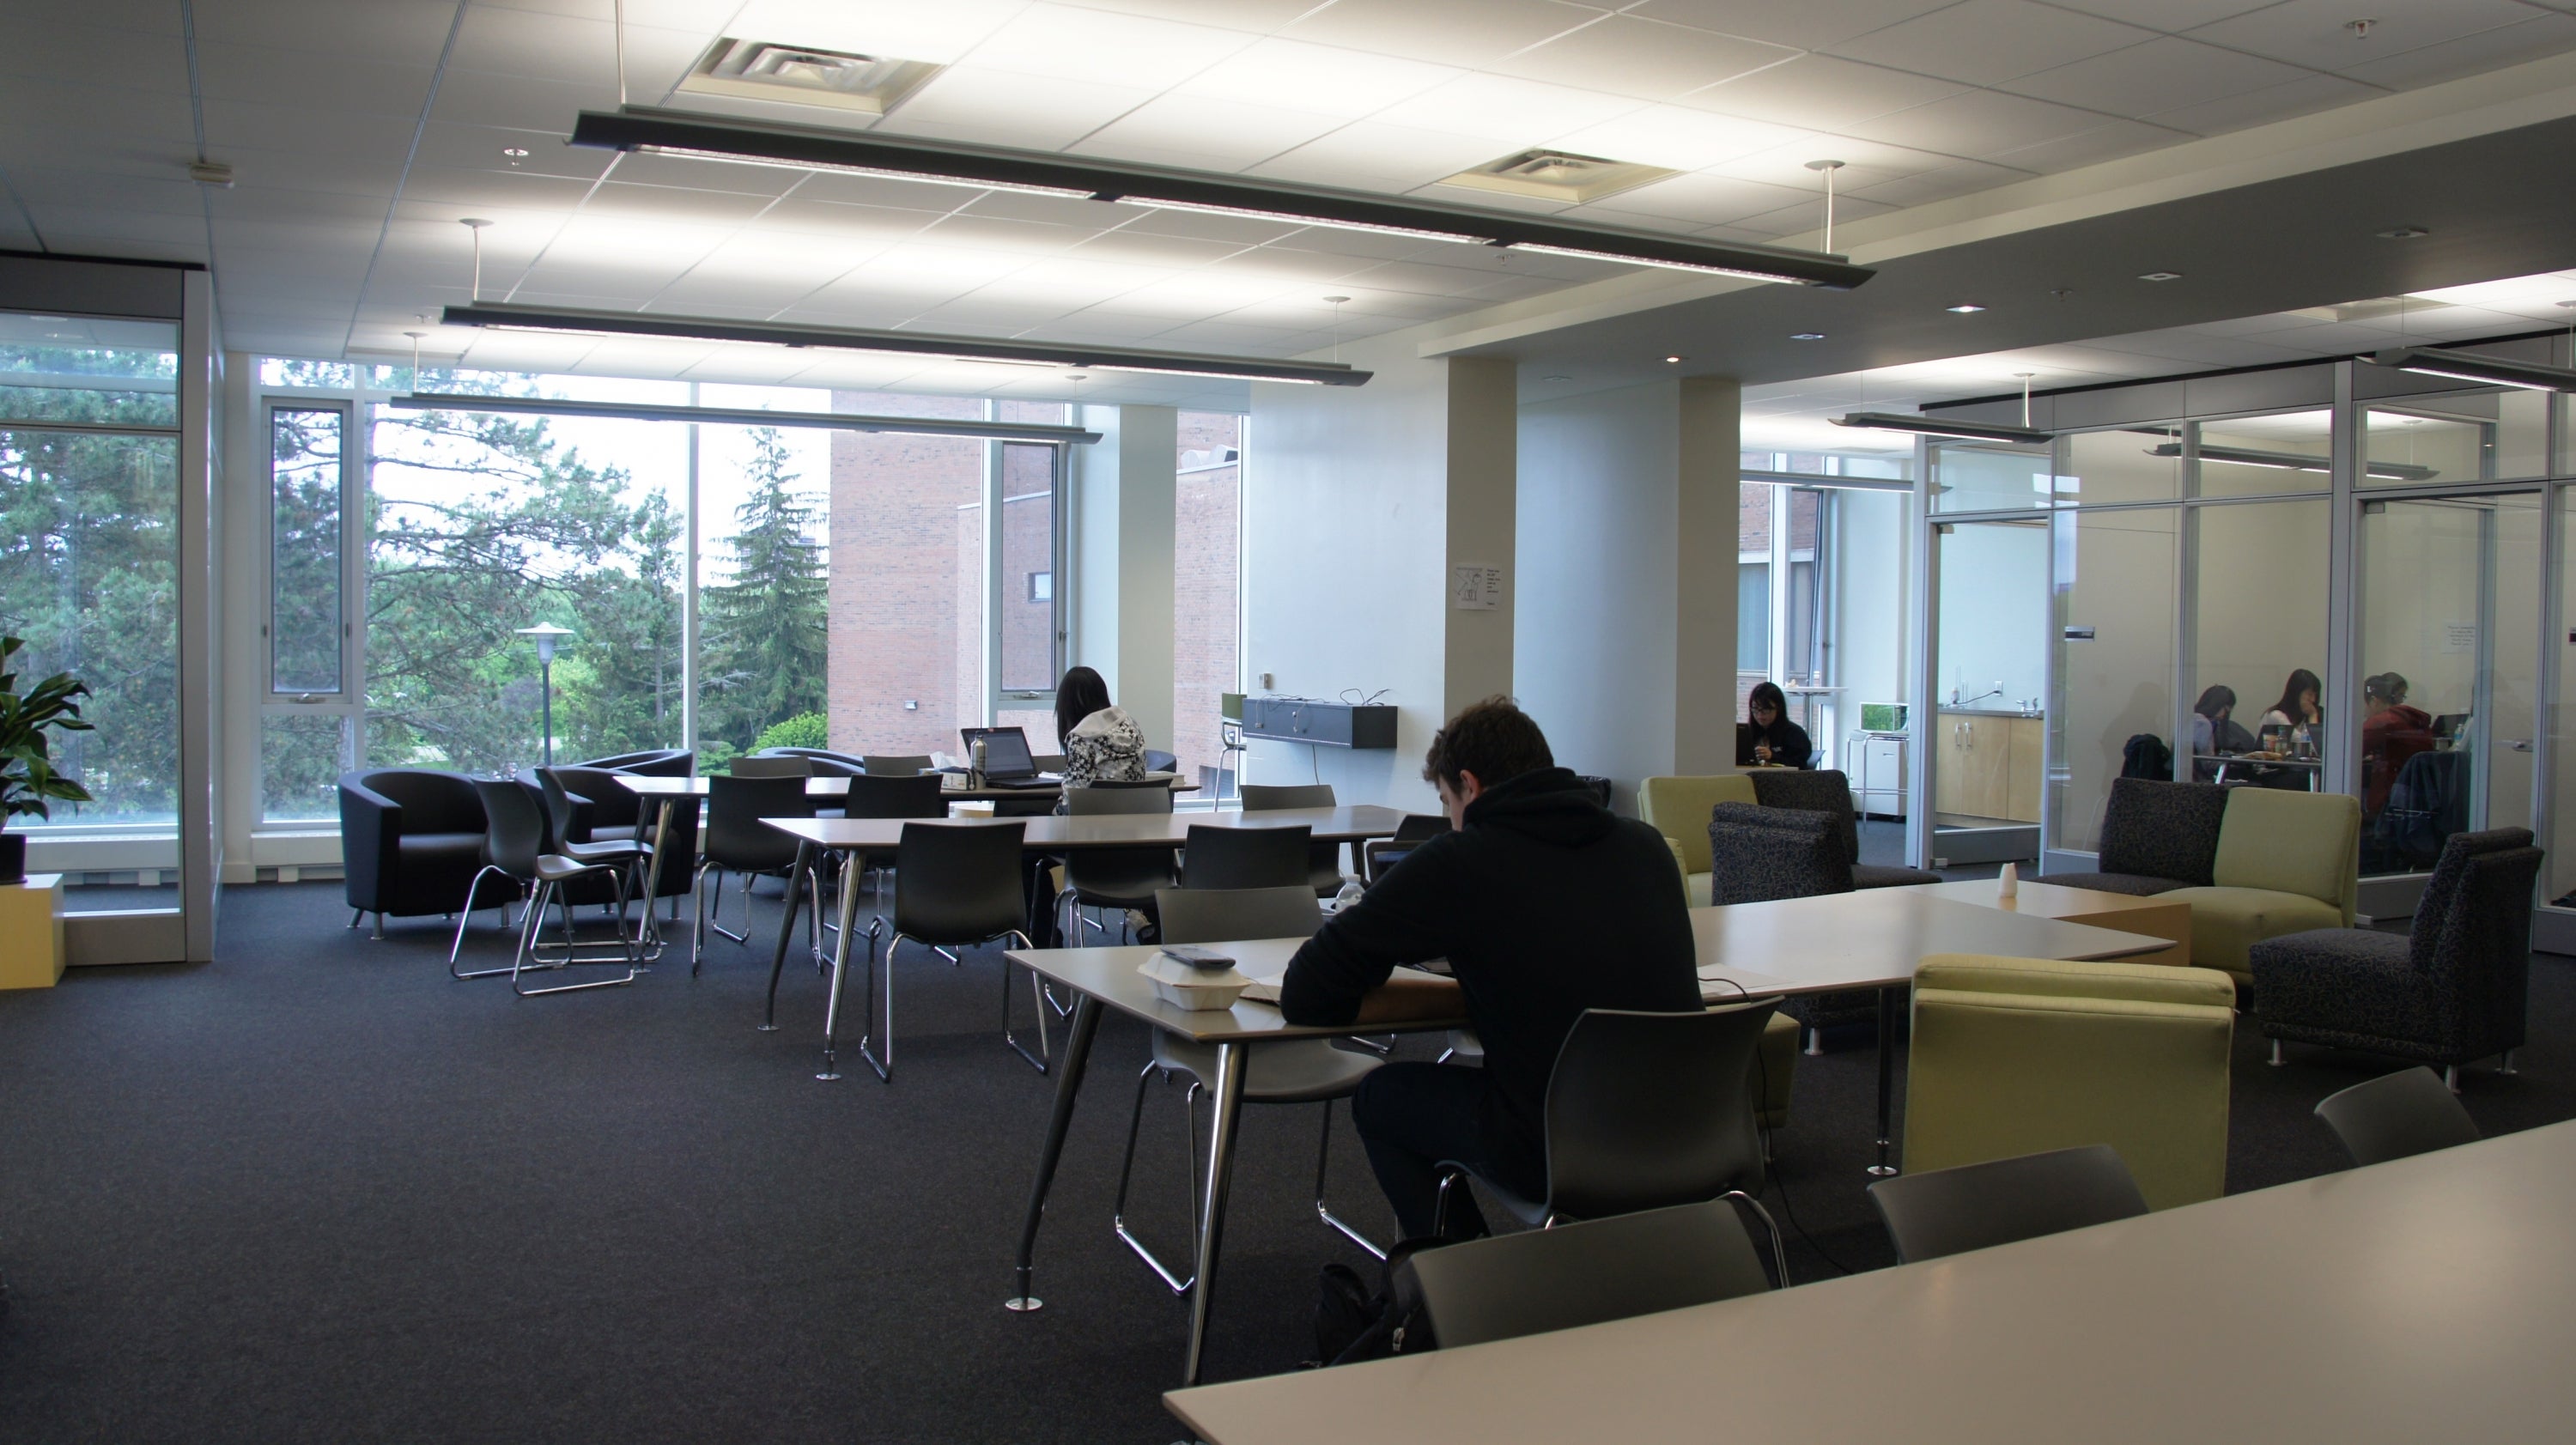 Students working in HH 2102